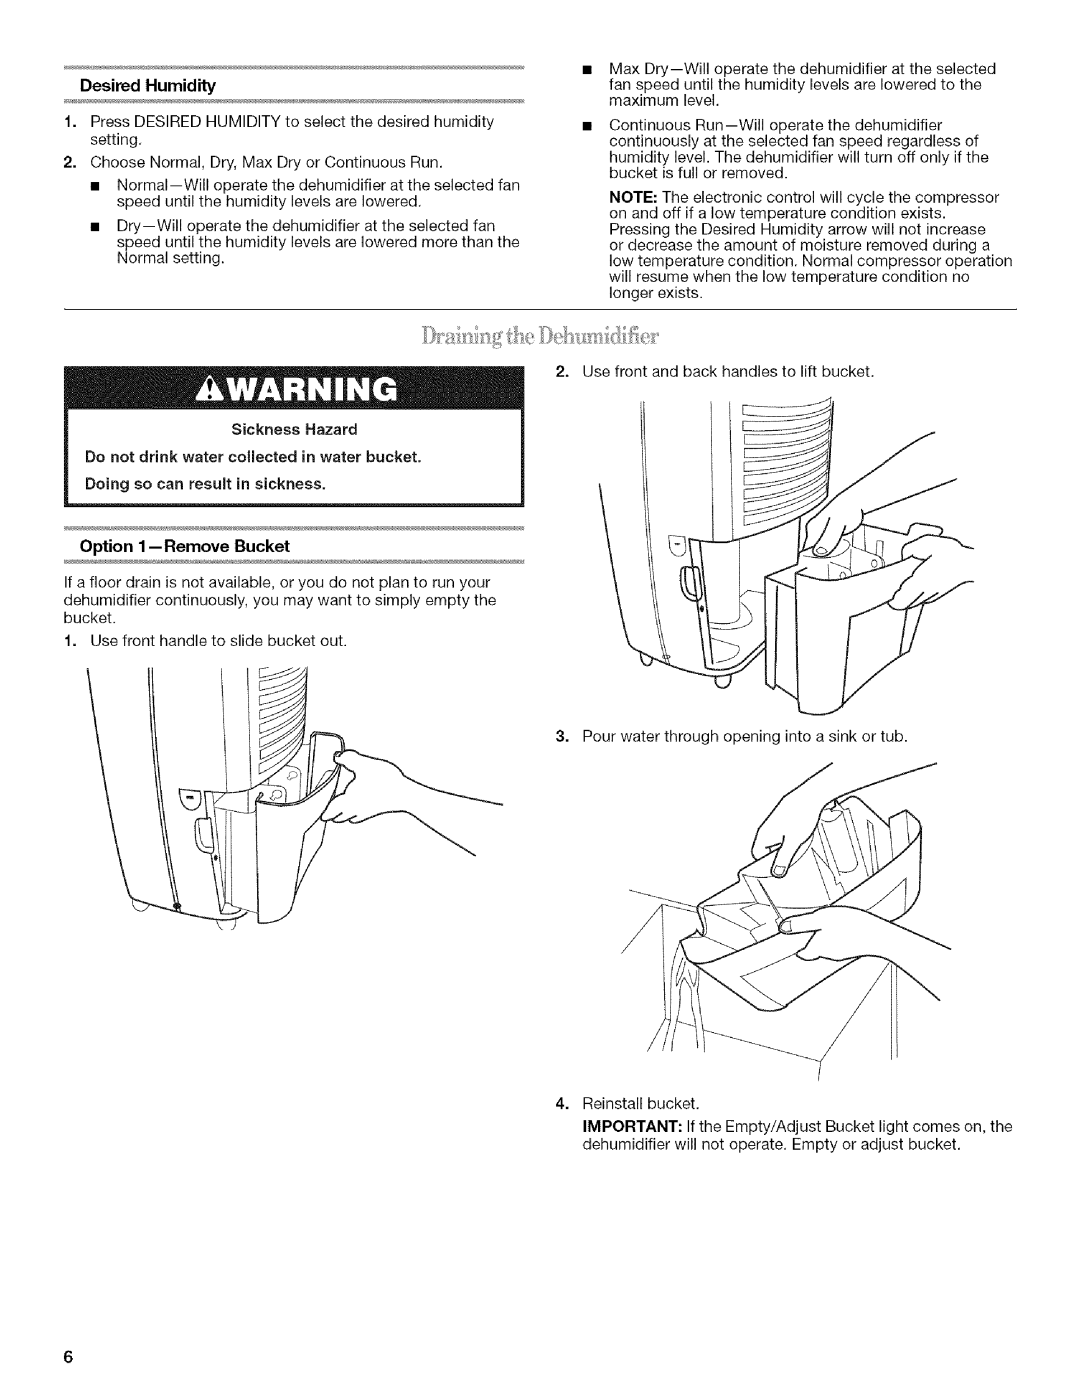 Whirlpool AD25B Option 1 --Remove Bucket, Desired Humidity, Sickness Hazard, Do not drink water collected in water bucket 